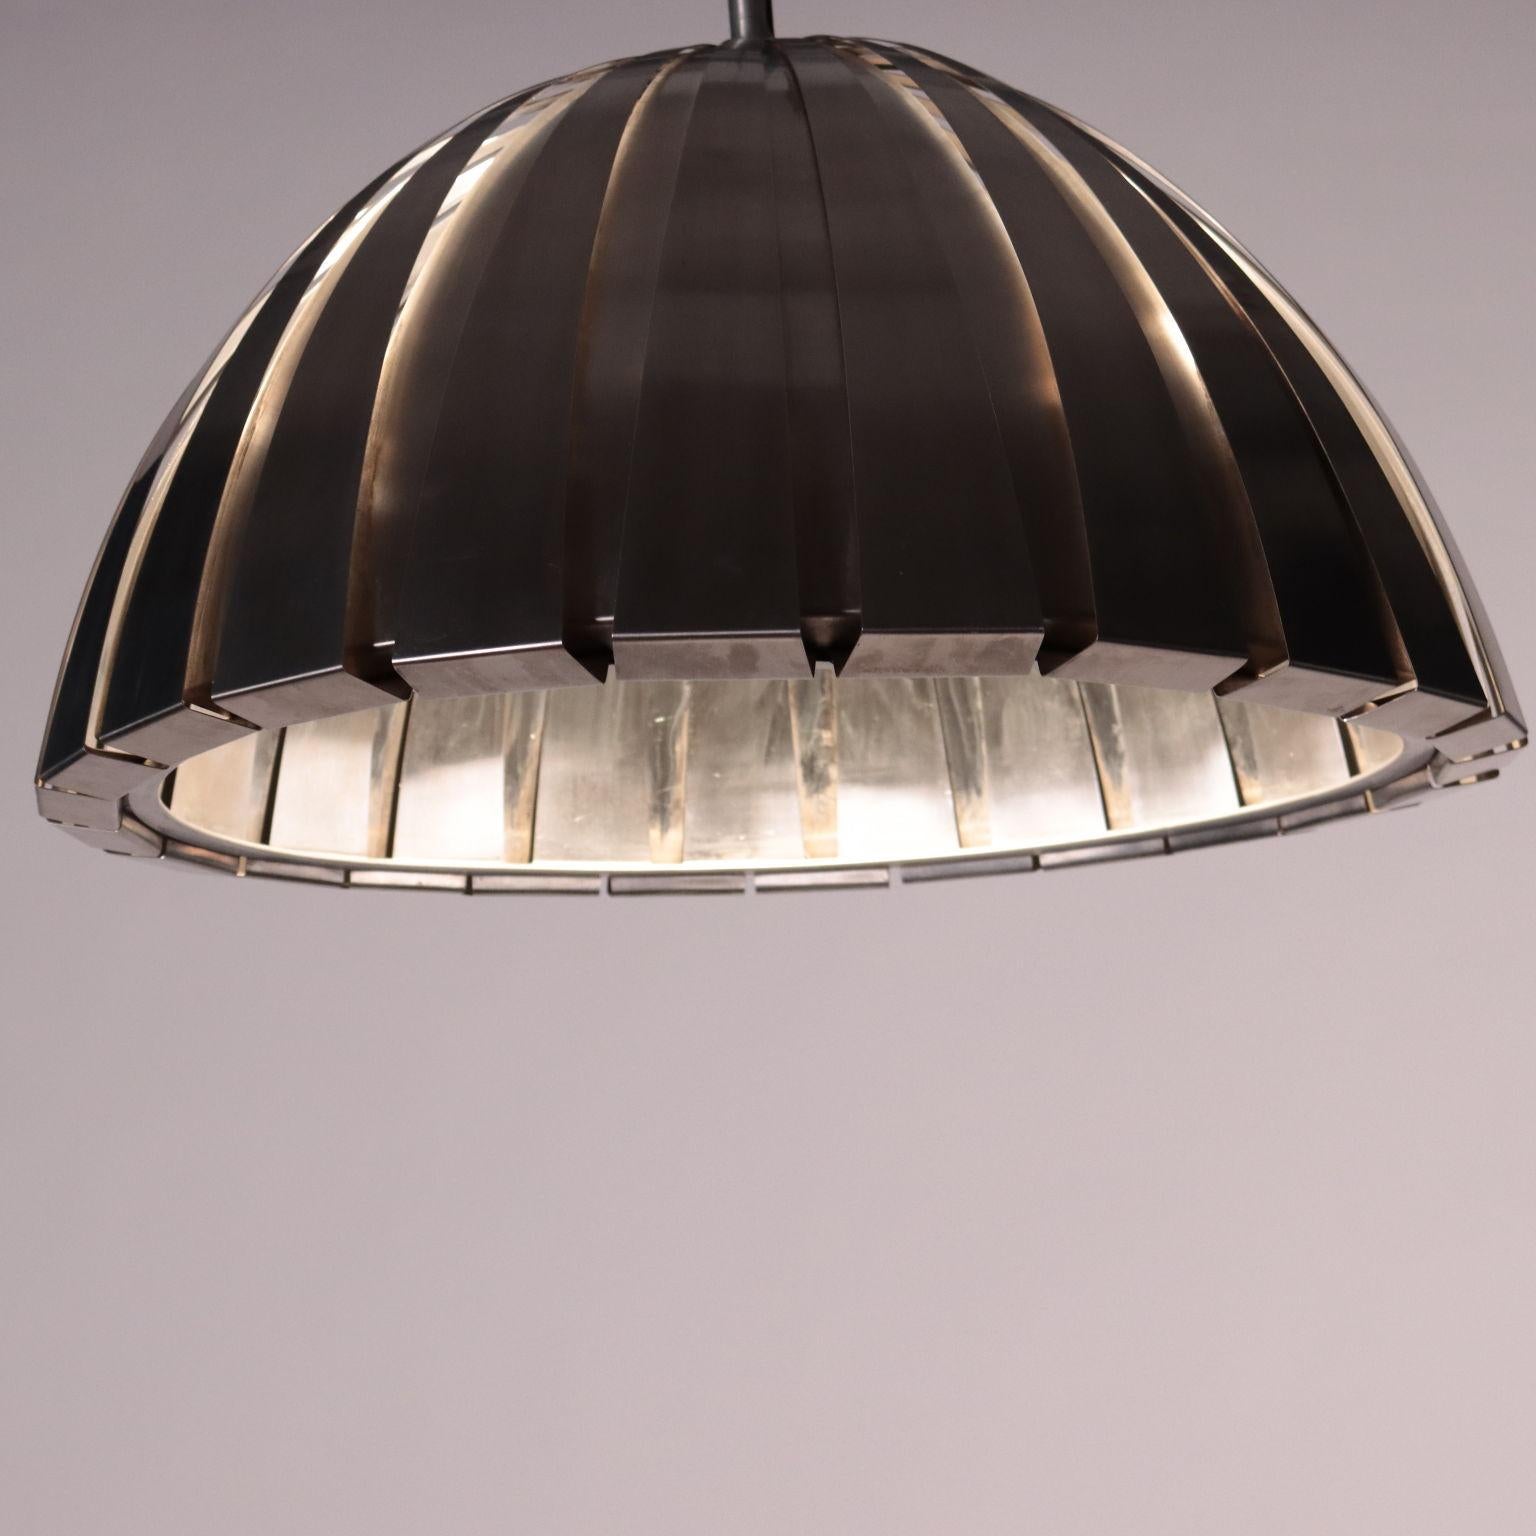 Mid-Century Modern Lamp Elio Martinelli Chromed Metal, Italy, 1960s 1970s For Sale